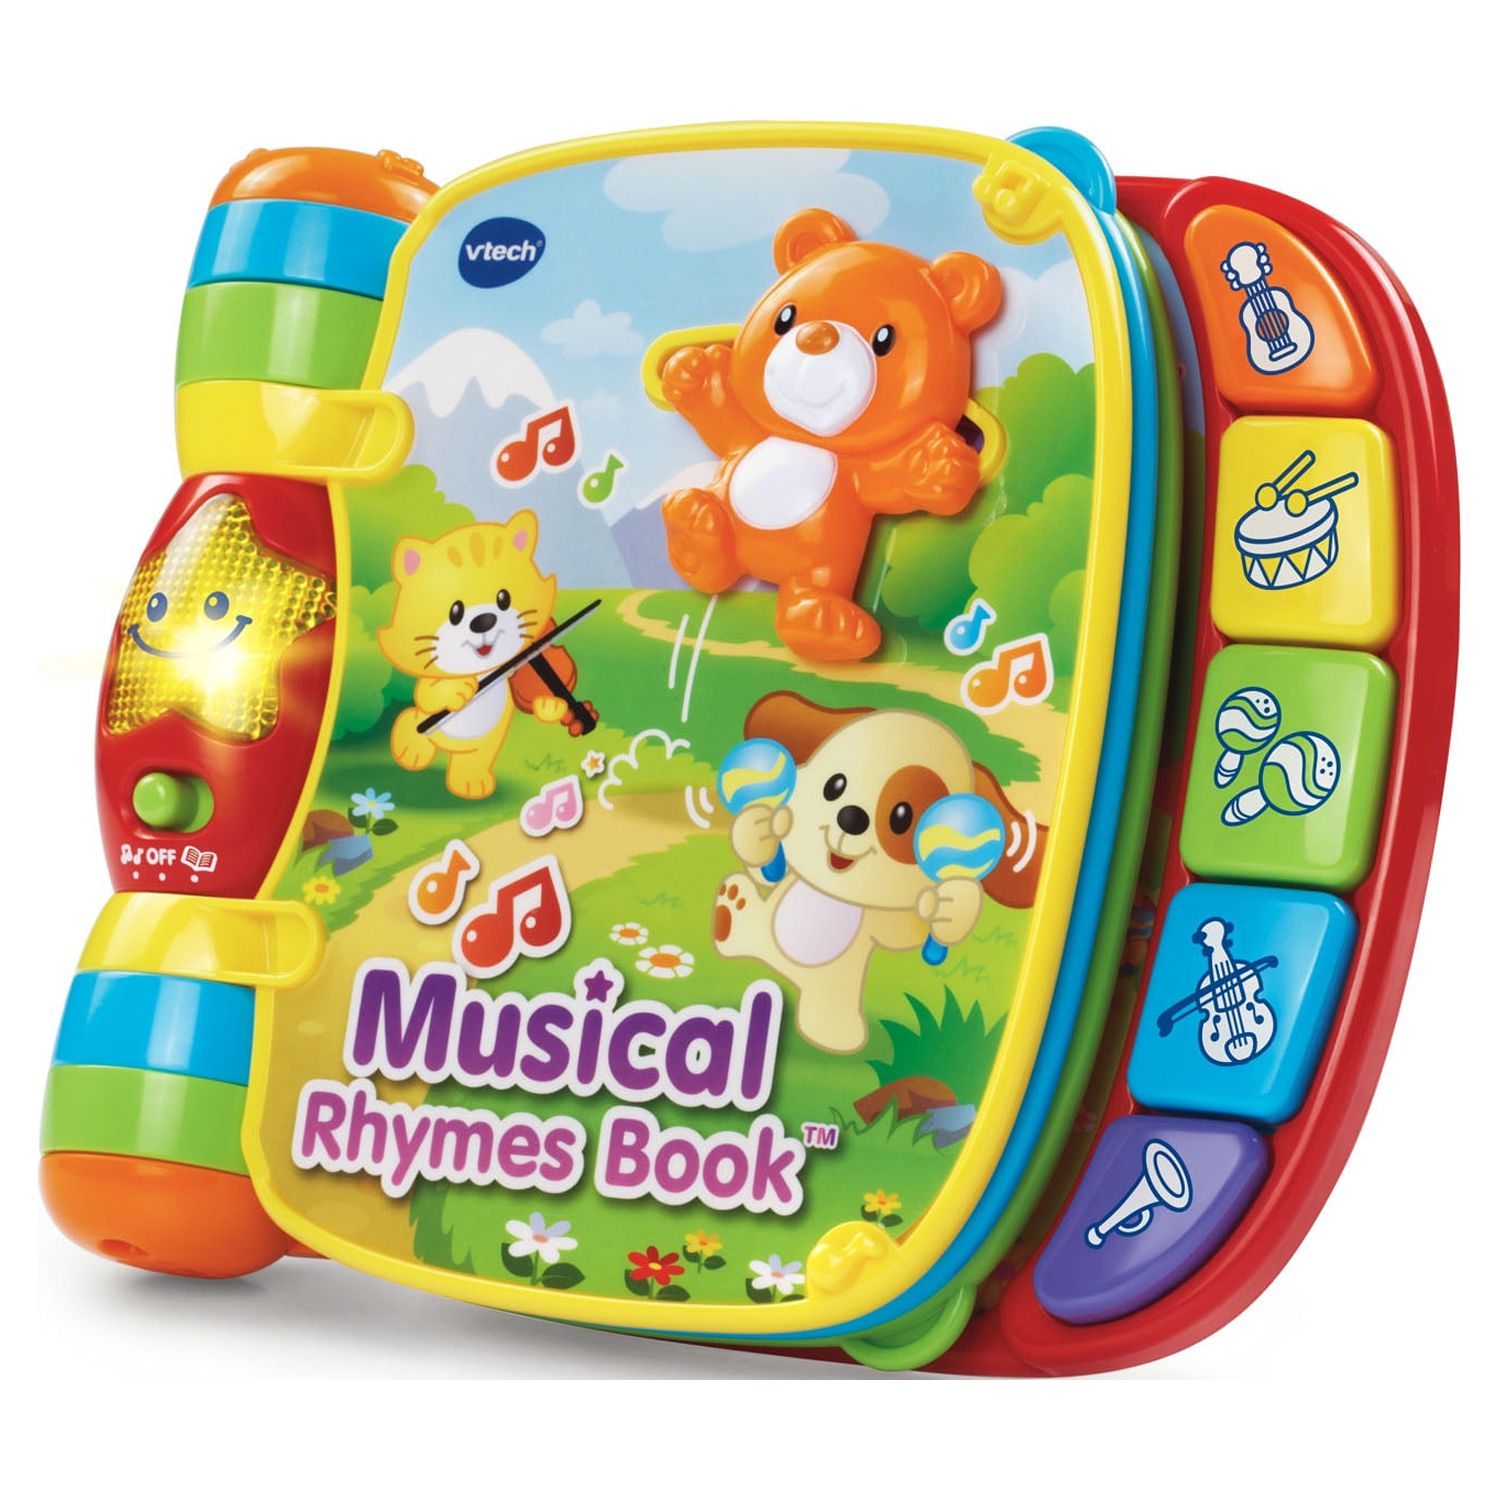 VTech Musical Rhymes Book Classic Nursery Rhymes for Babies - image 1 of 9